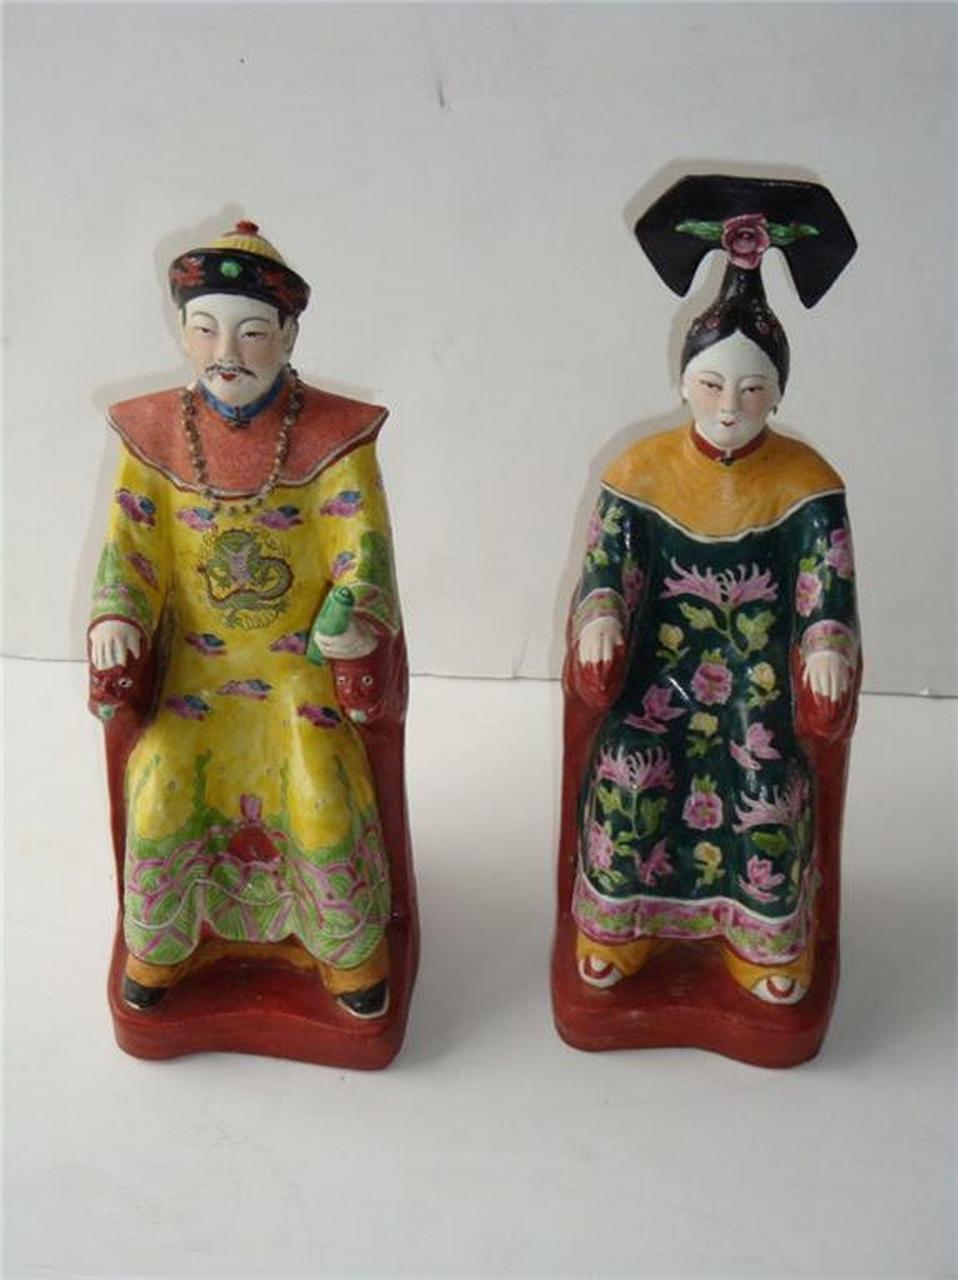 The Following Item that we are offering is A Rare Pair of Estate Chinese Porcelain of a Seated Emperor and Empress. Handpainted beautifully with Outstanding Detail and Beautiful Array of Colors on each Figure. Perfect for any home. A Unique Find!!!